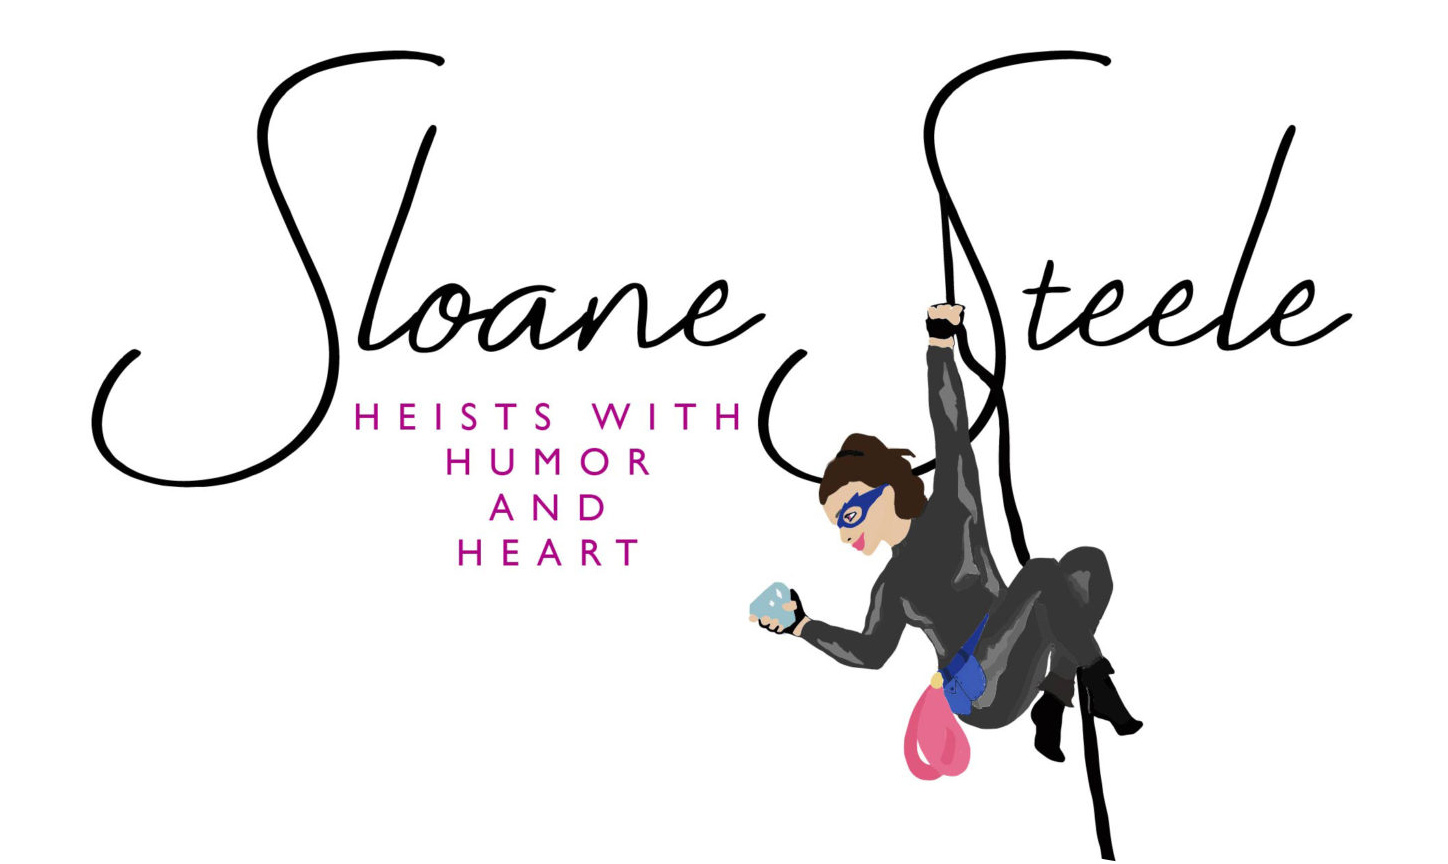 SUBSCRIBE TO SLOANE'S NEWSLETTER